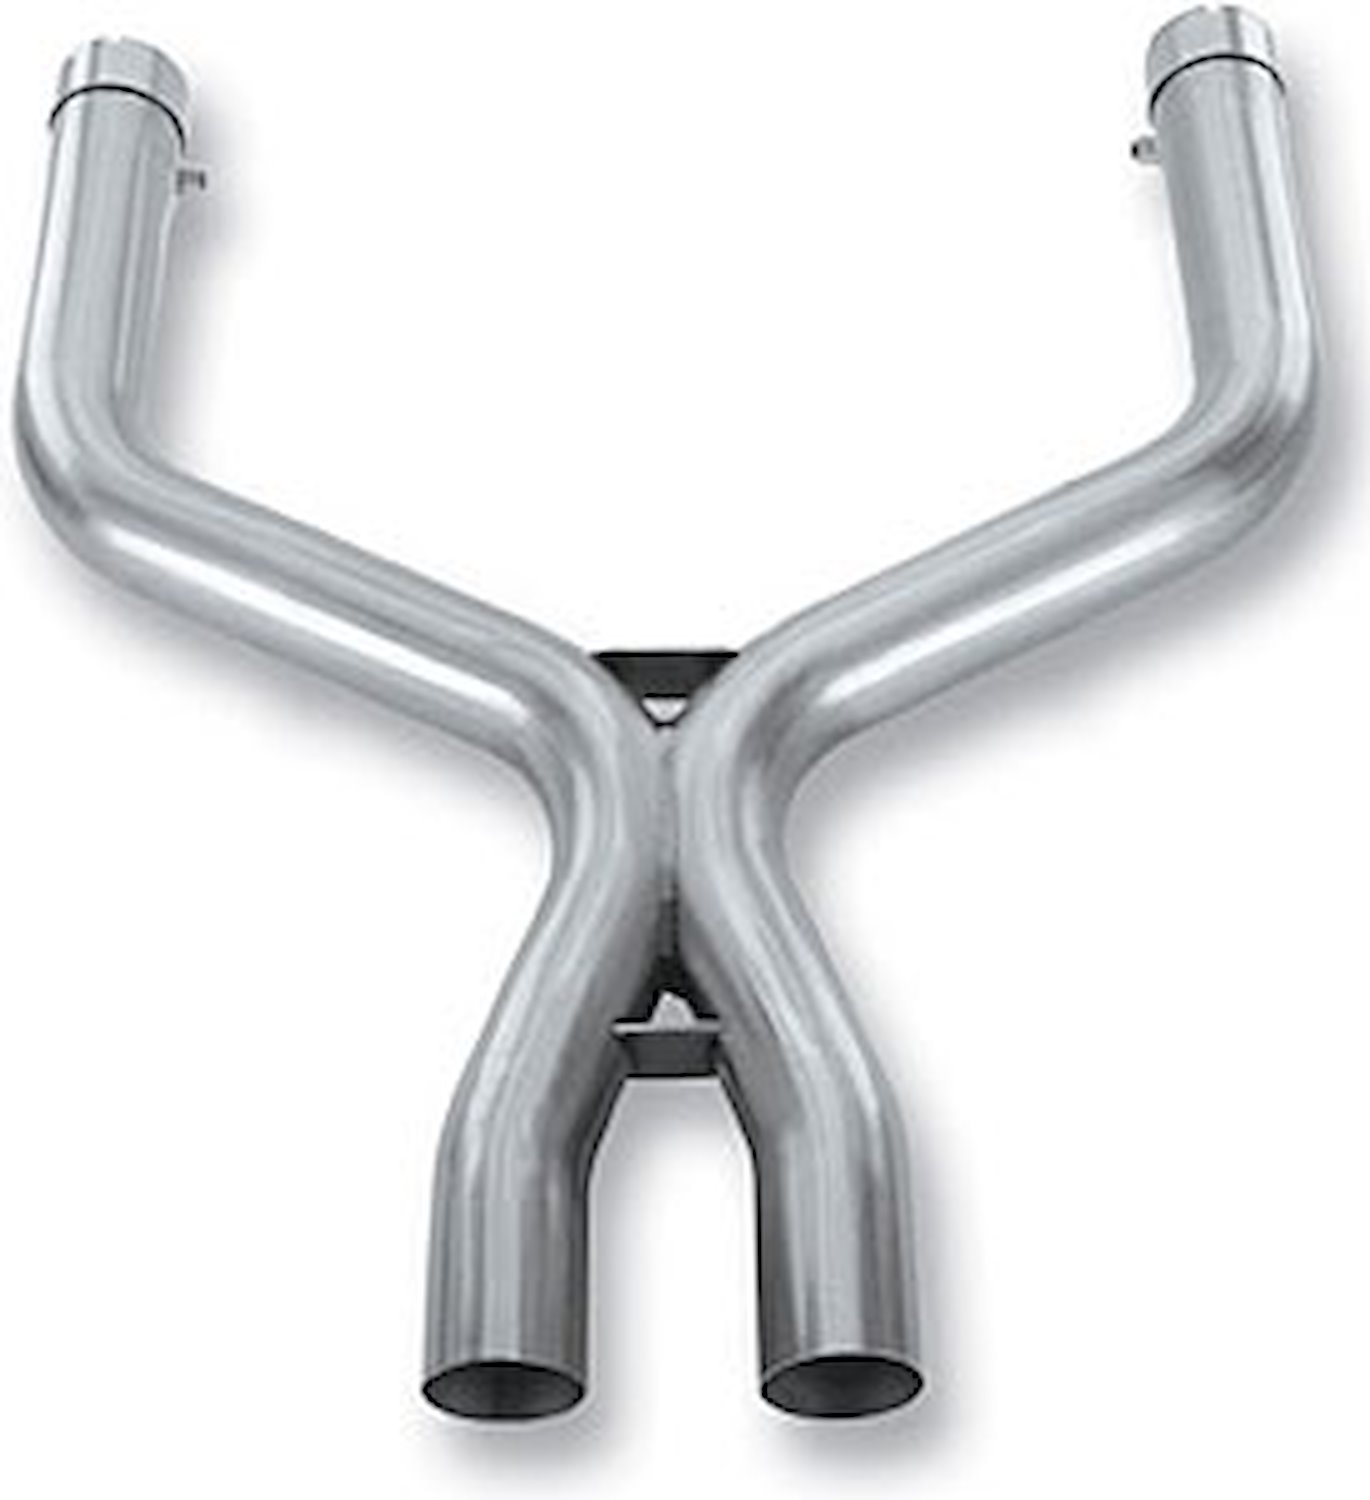 Stainless Steel X-Pipe 2008-10 Ford Mustang GT 4.6L